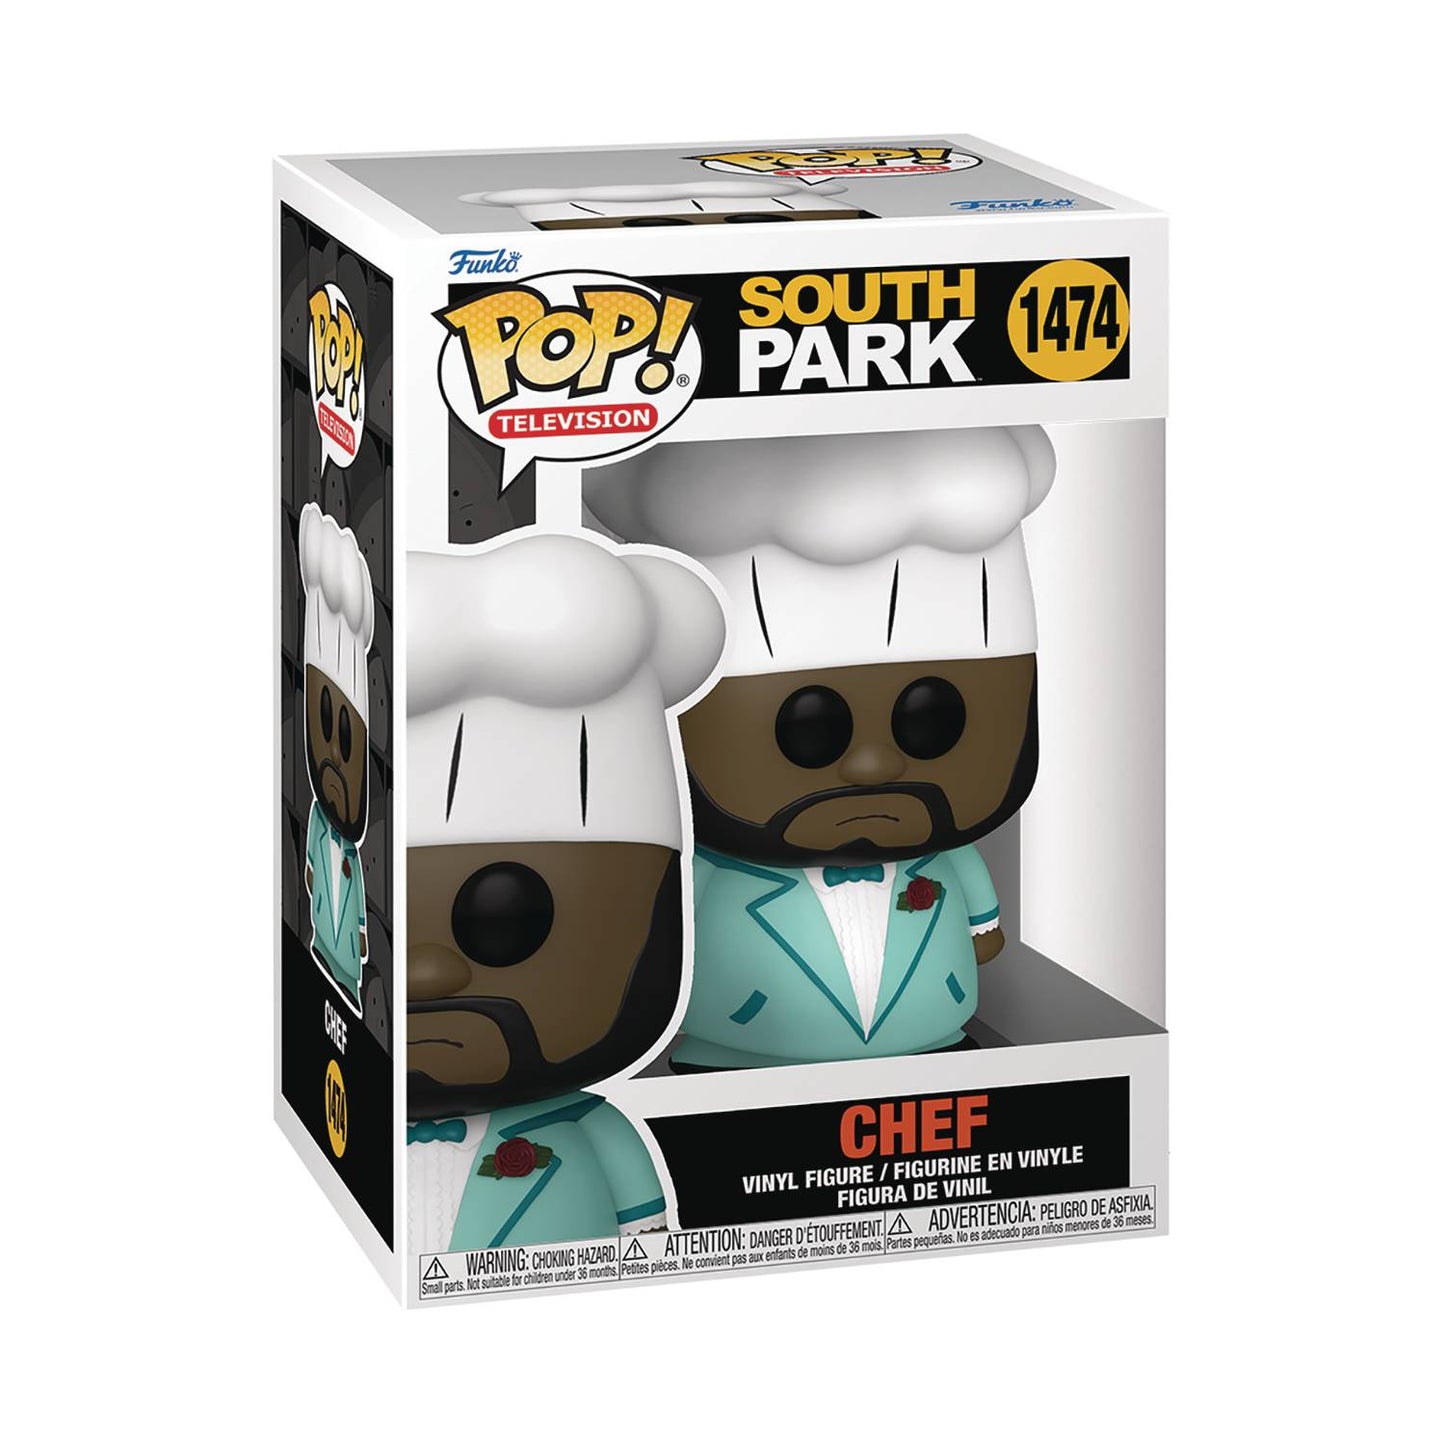 Funko Television Pop!: South Park - Chef in Suit #1474